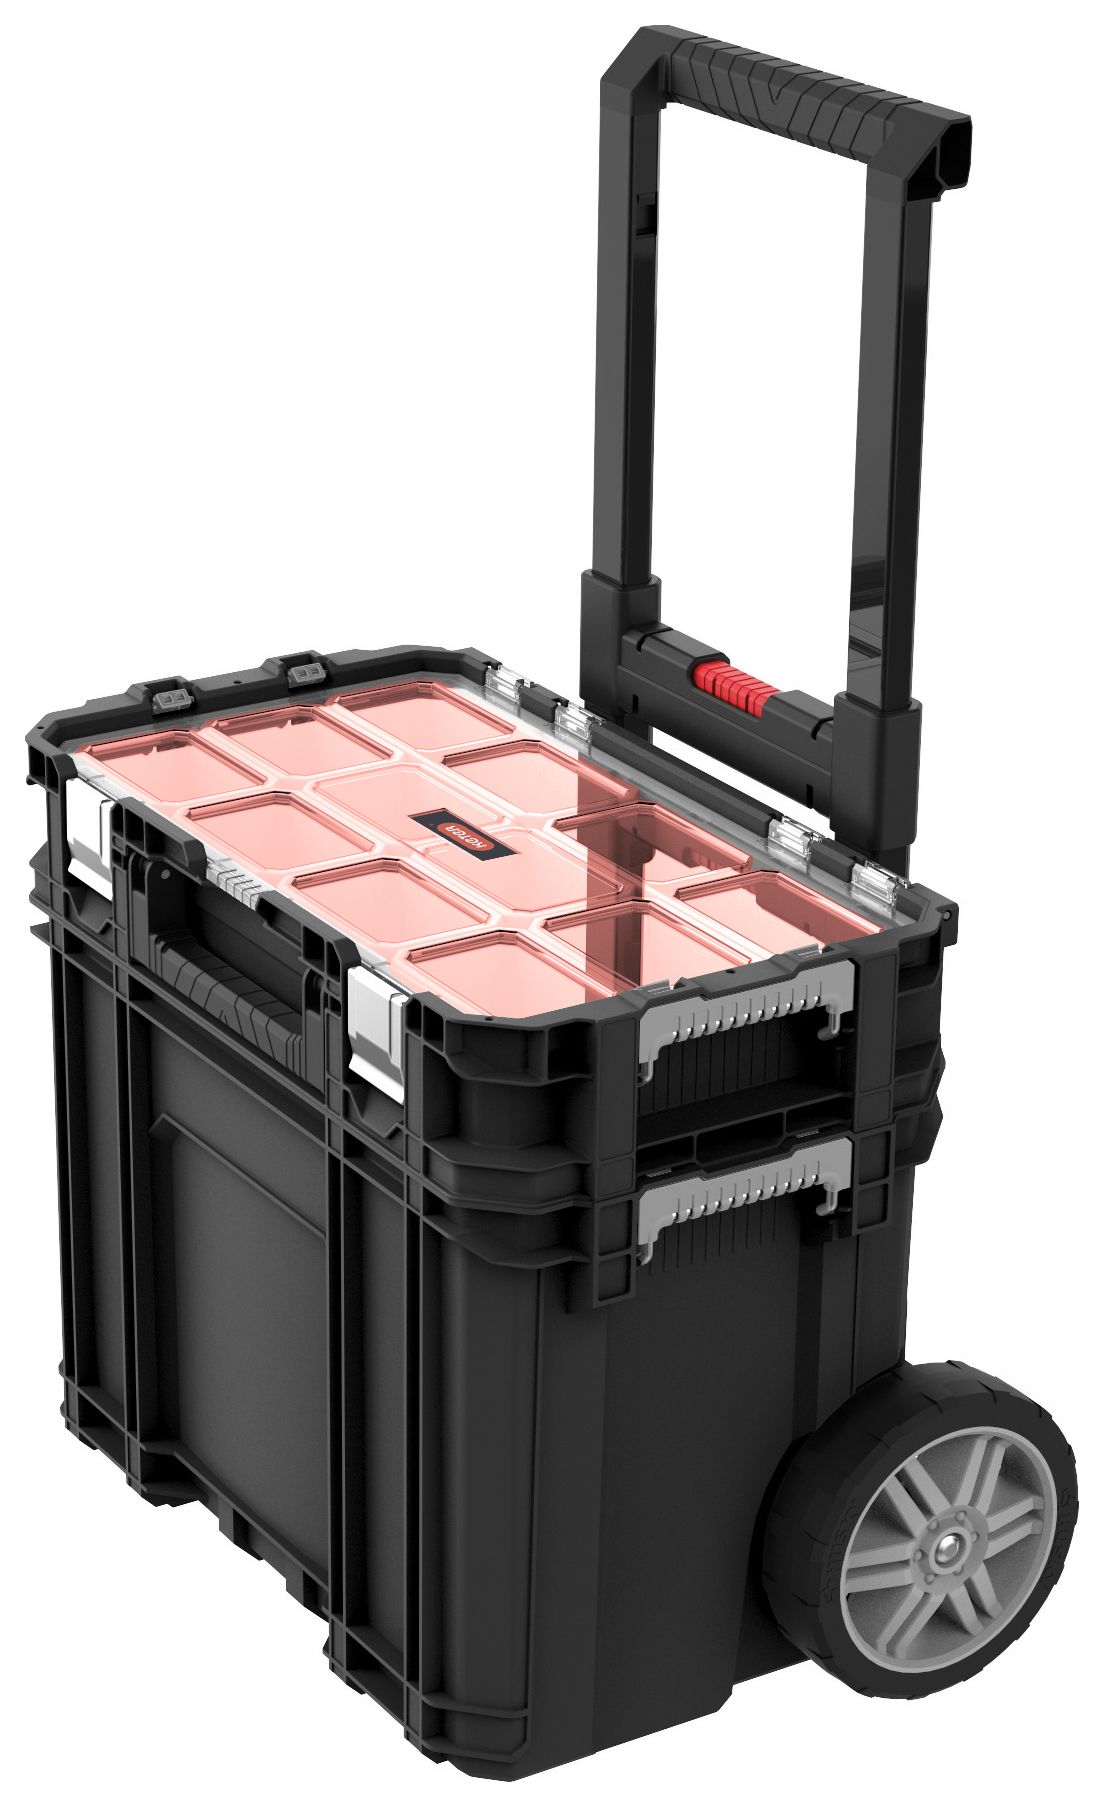 Image of Keter Connect Tool Storage Mobile Cart with Organiser